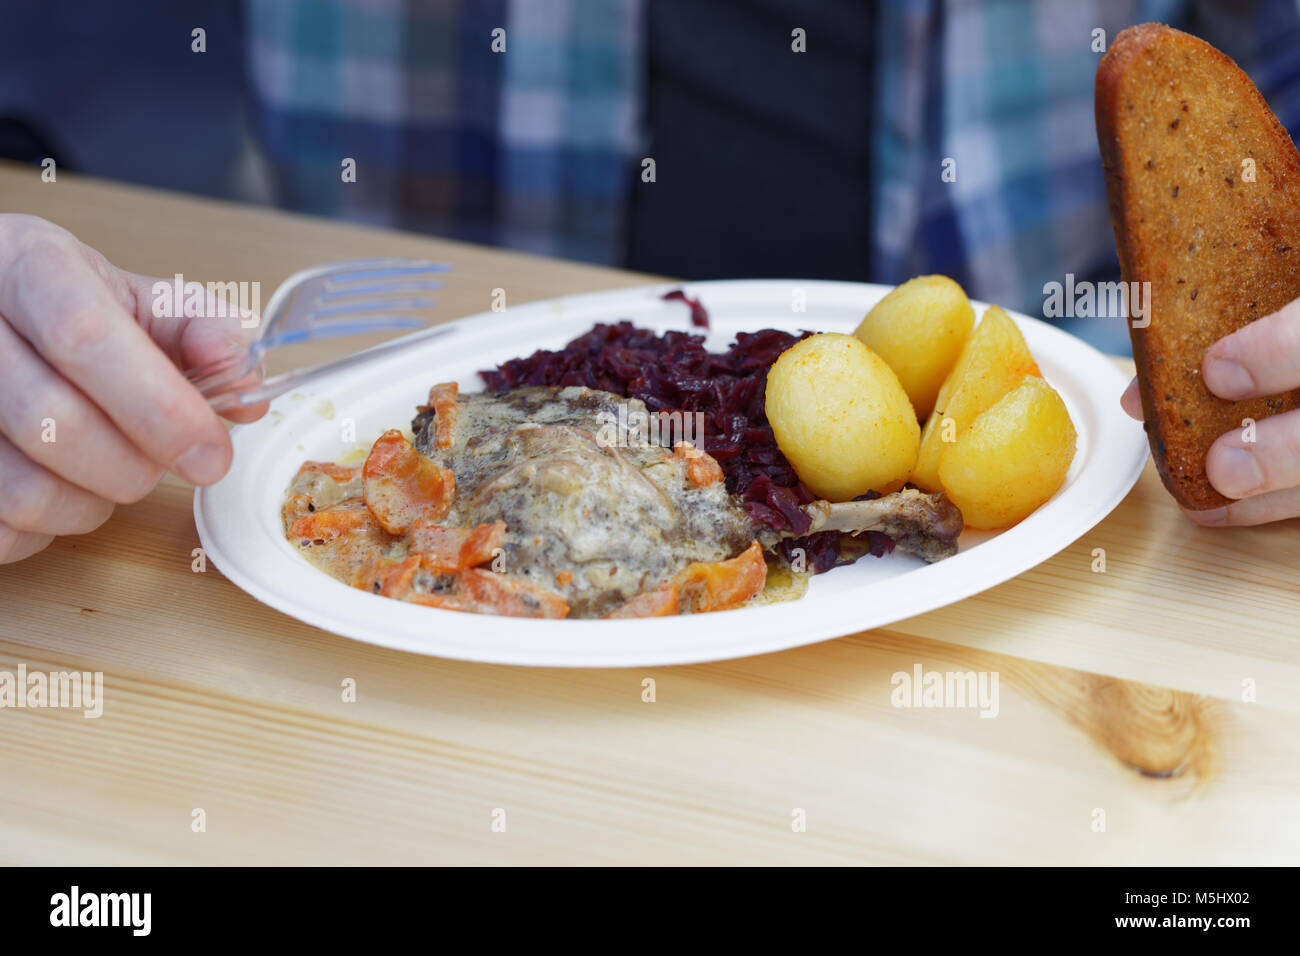 Man eating roasted duck leg with braised red cabbage, boiled potato, and carrot under white sauce in a street food restaurant Stock Photo